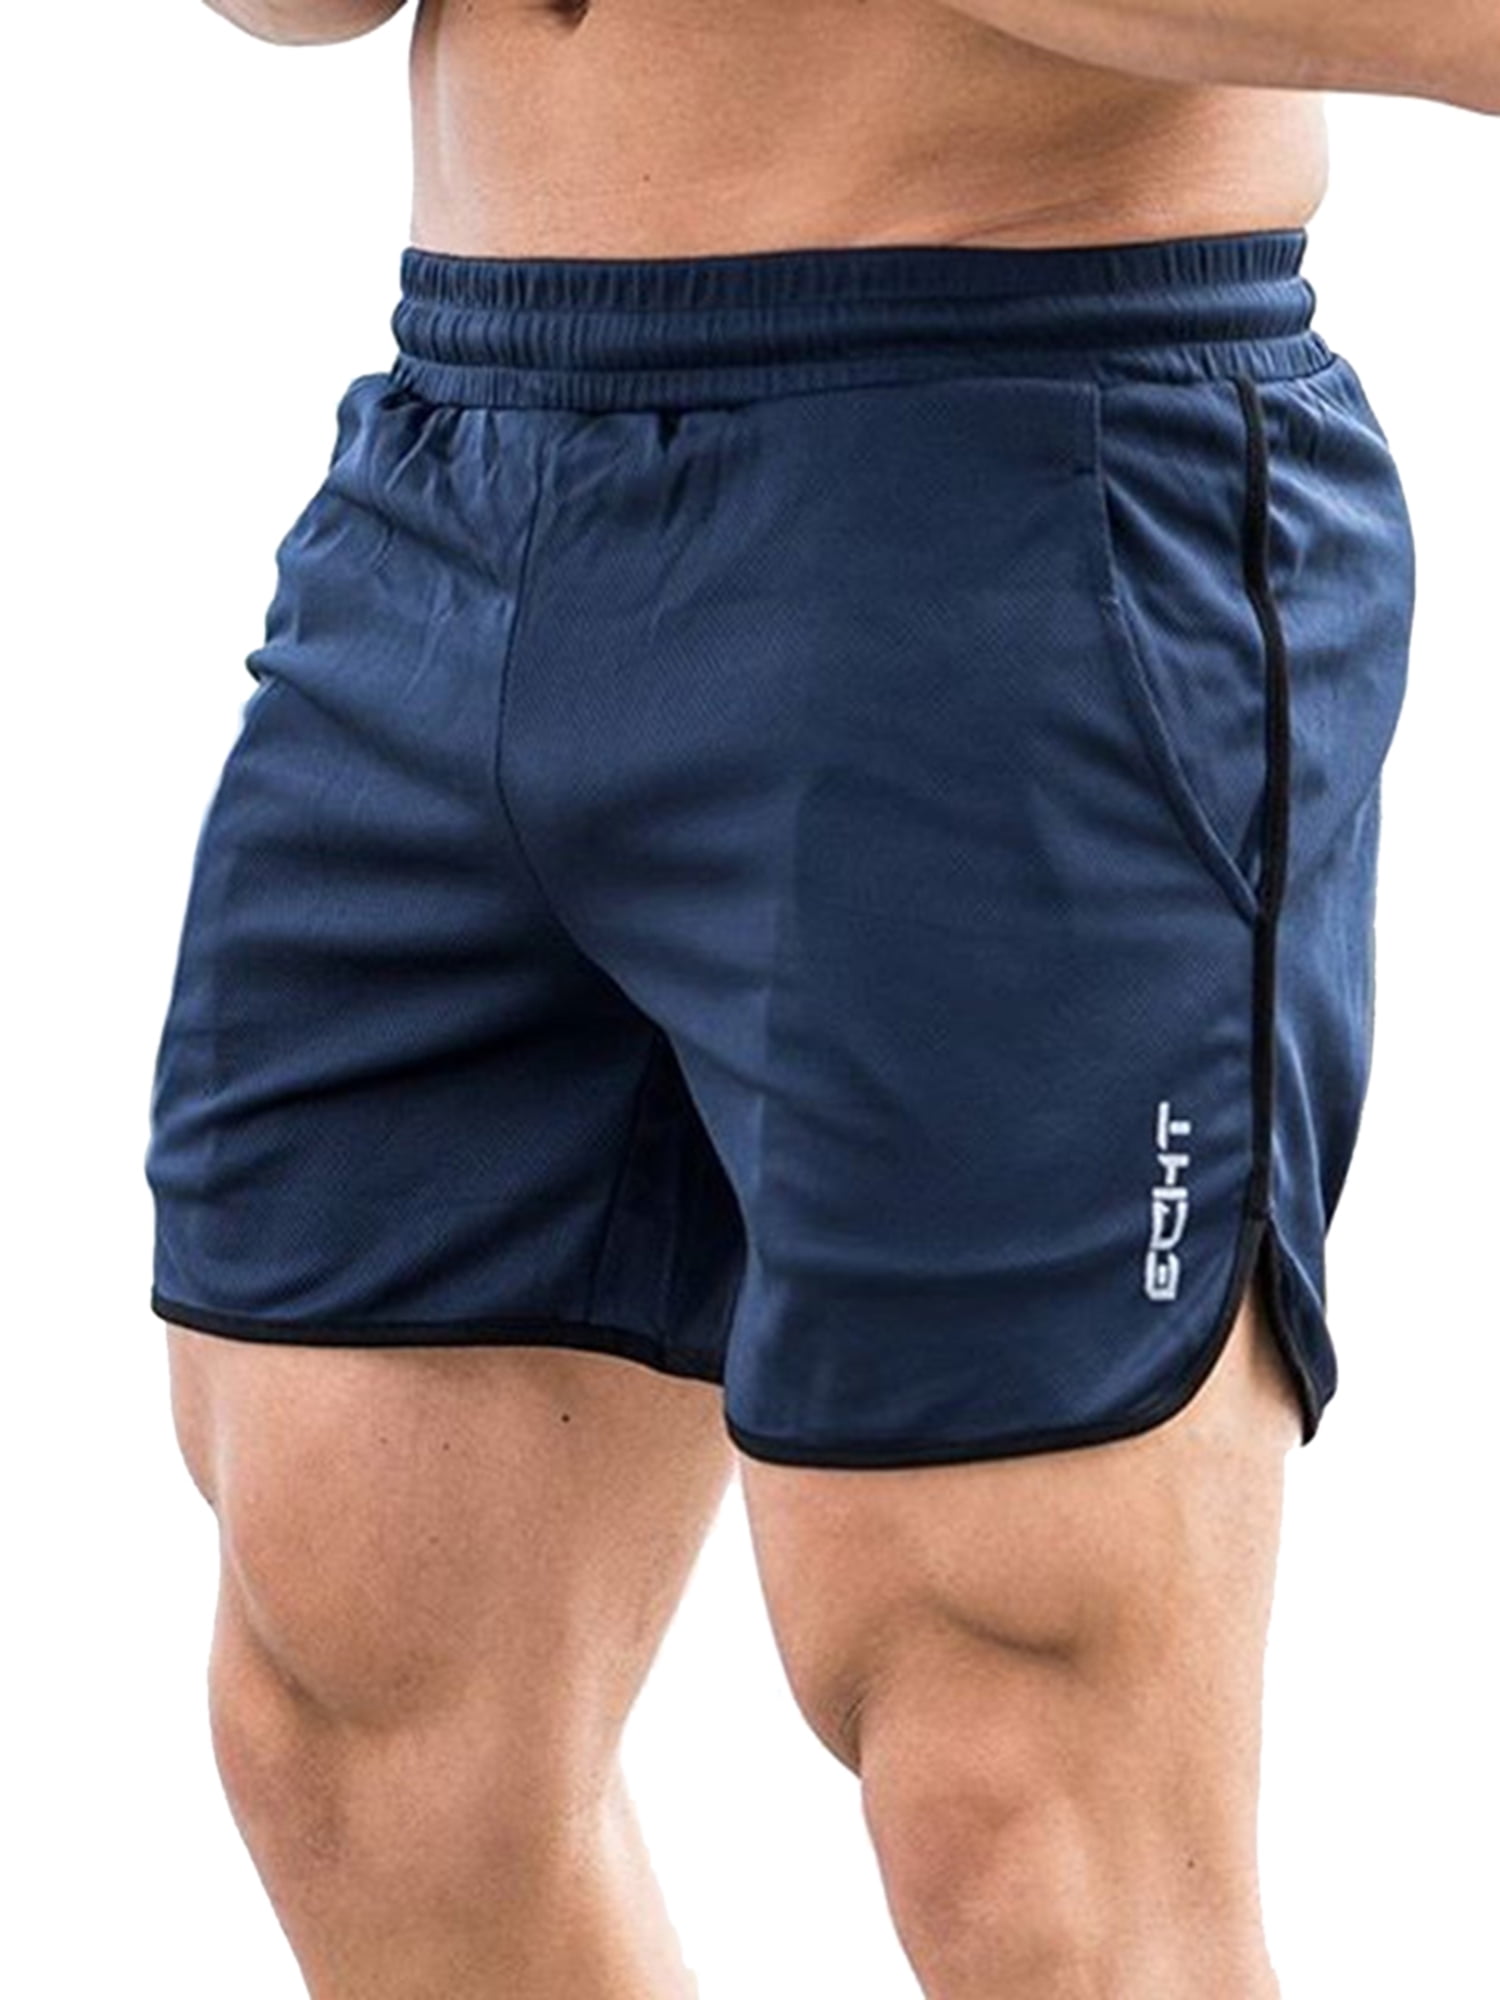 Football Shorts For Men Premium Quality Jogging Gym Running Sport Fitness Active 